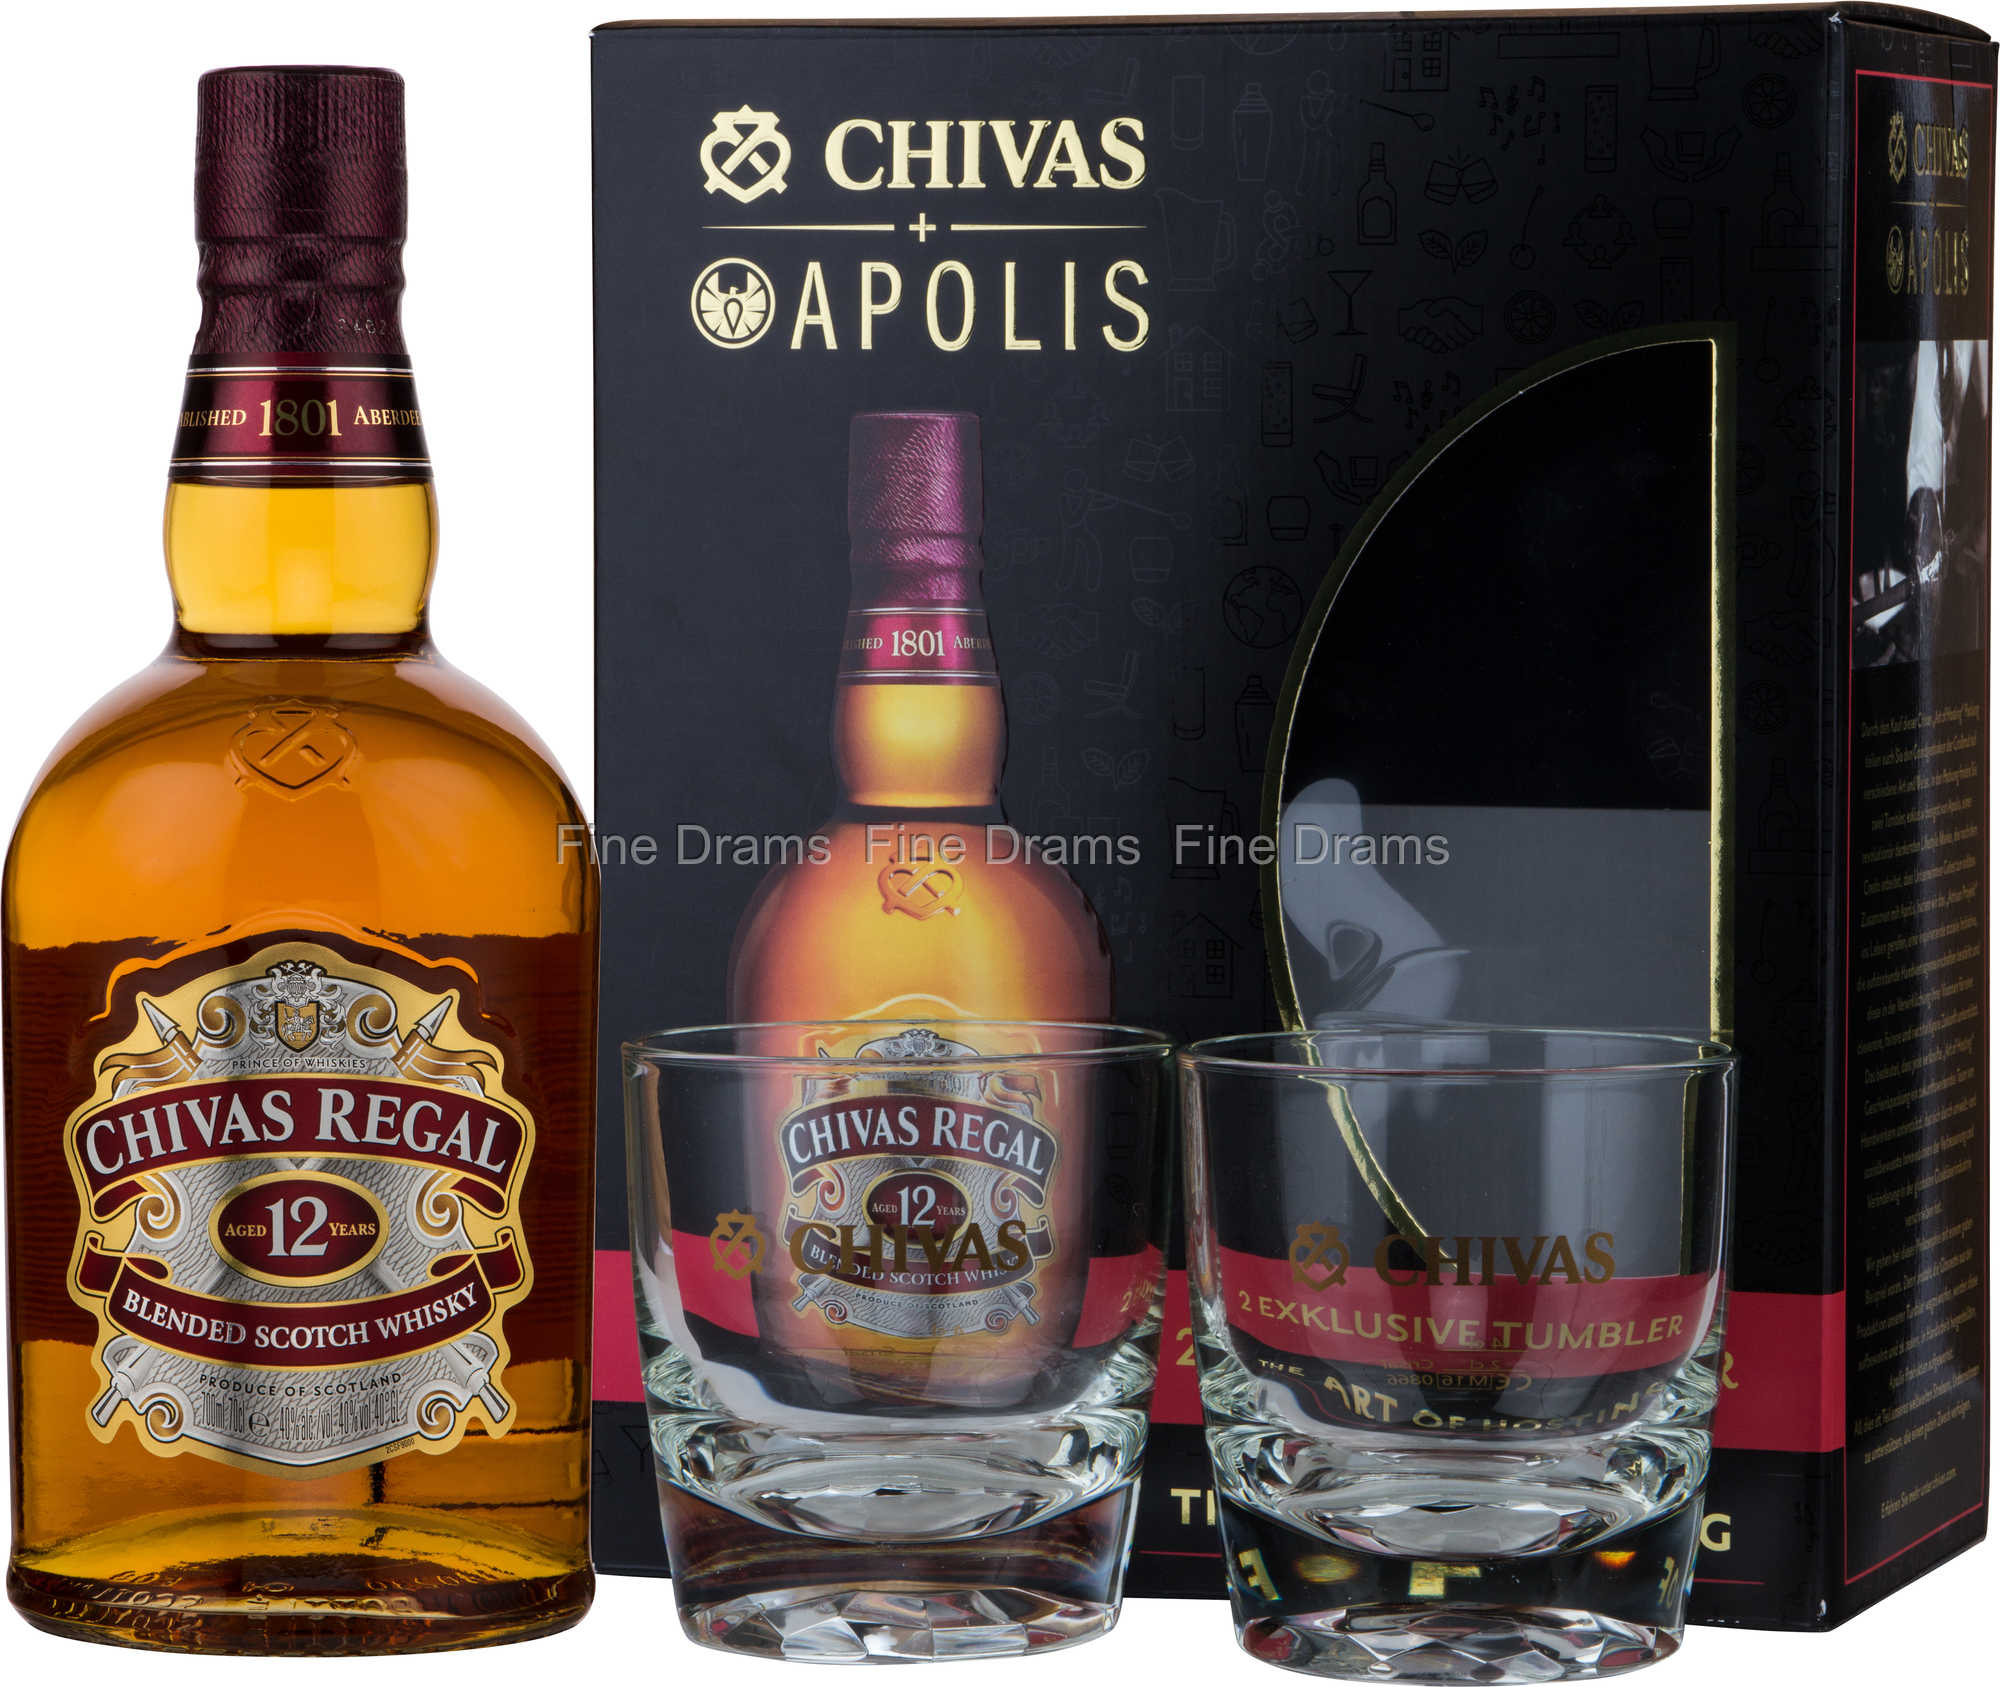 Chivas Regal 12 Year Old Whisky Gift Pack - 2 Glasses